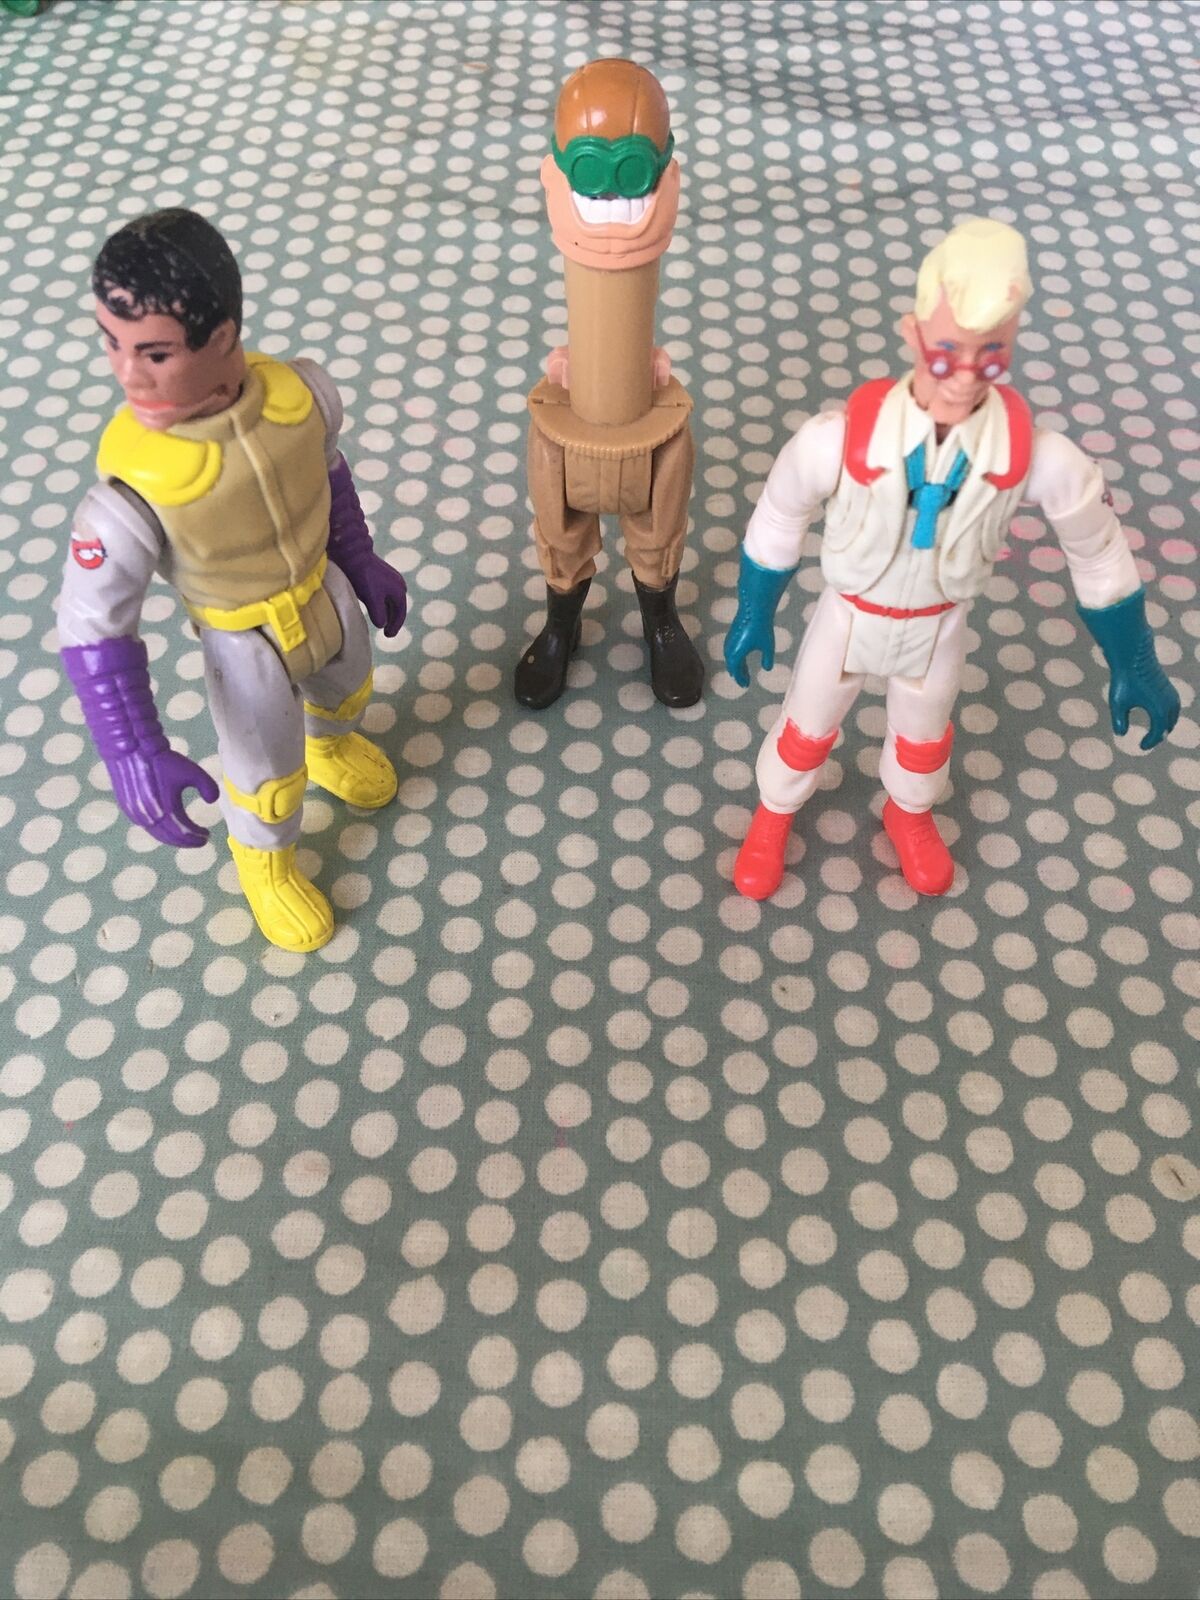 Ghostbusters Figures Fright Features X3 Spares Or Repairs Broken Parts Winston